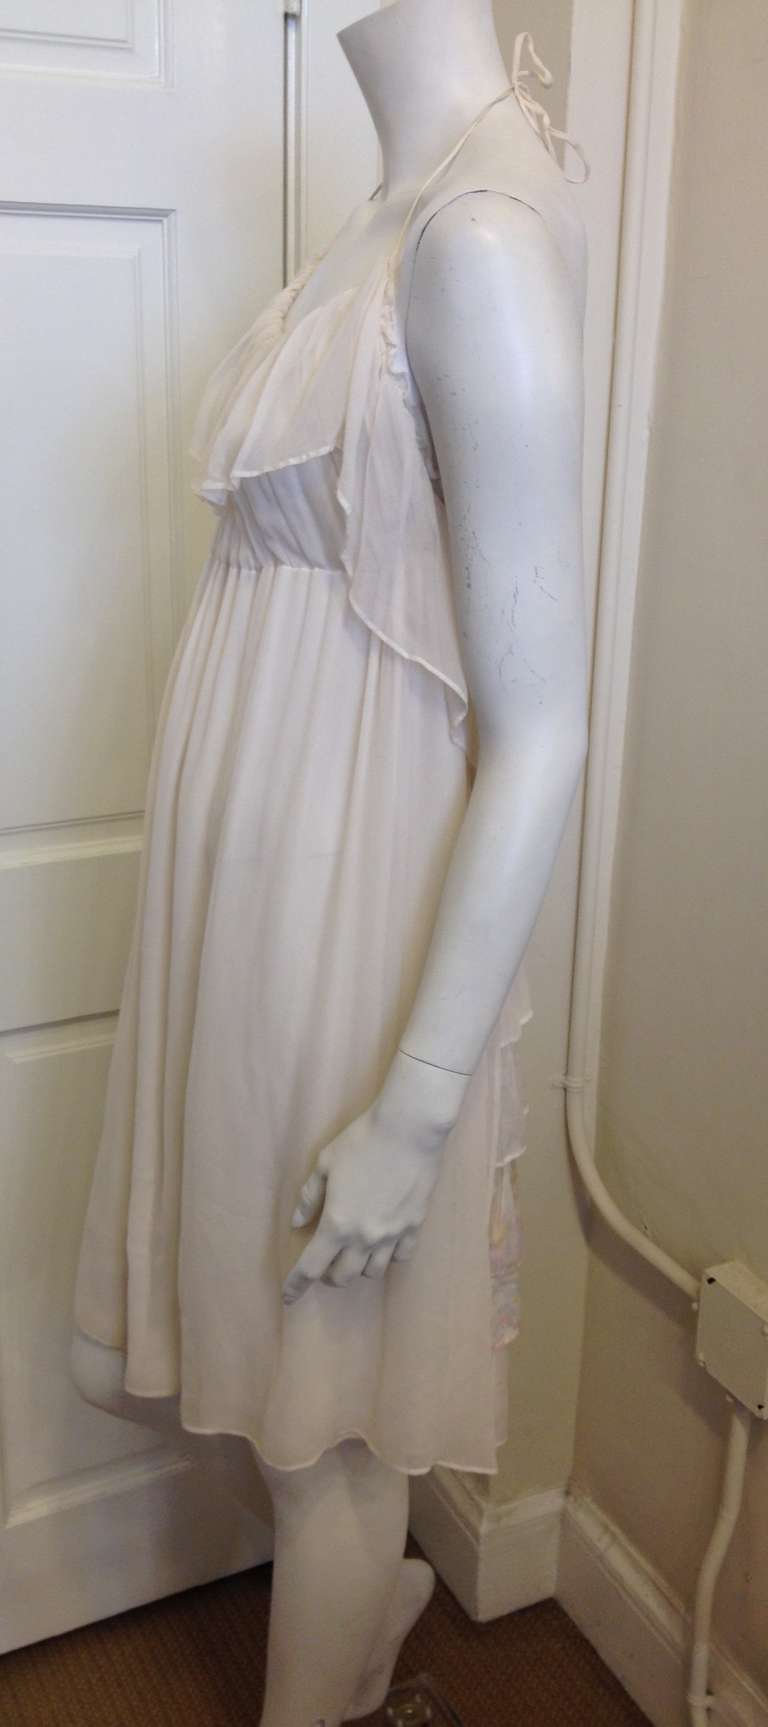 Stella McCartney Cream Summer Dress In Excellent Condition For Sale In San Francisco, CA